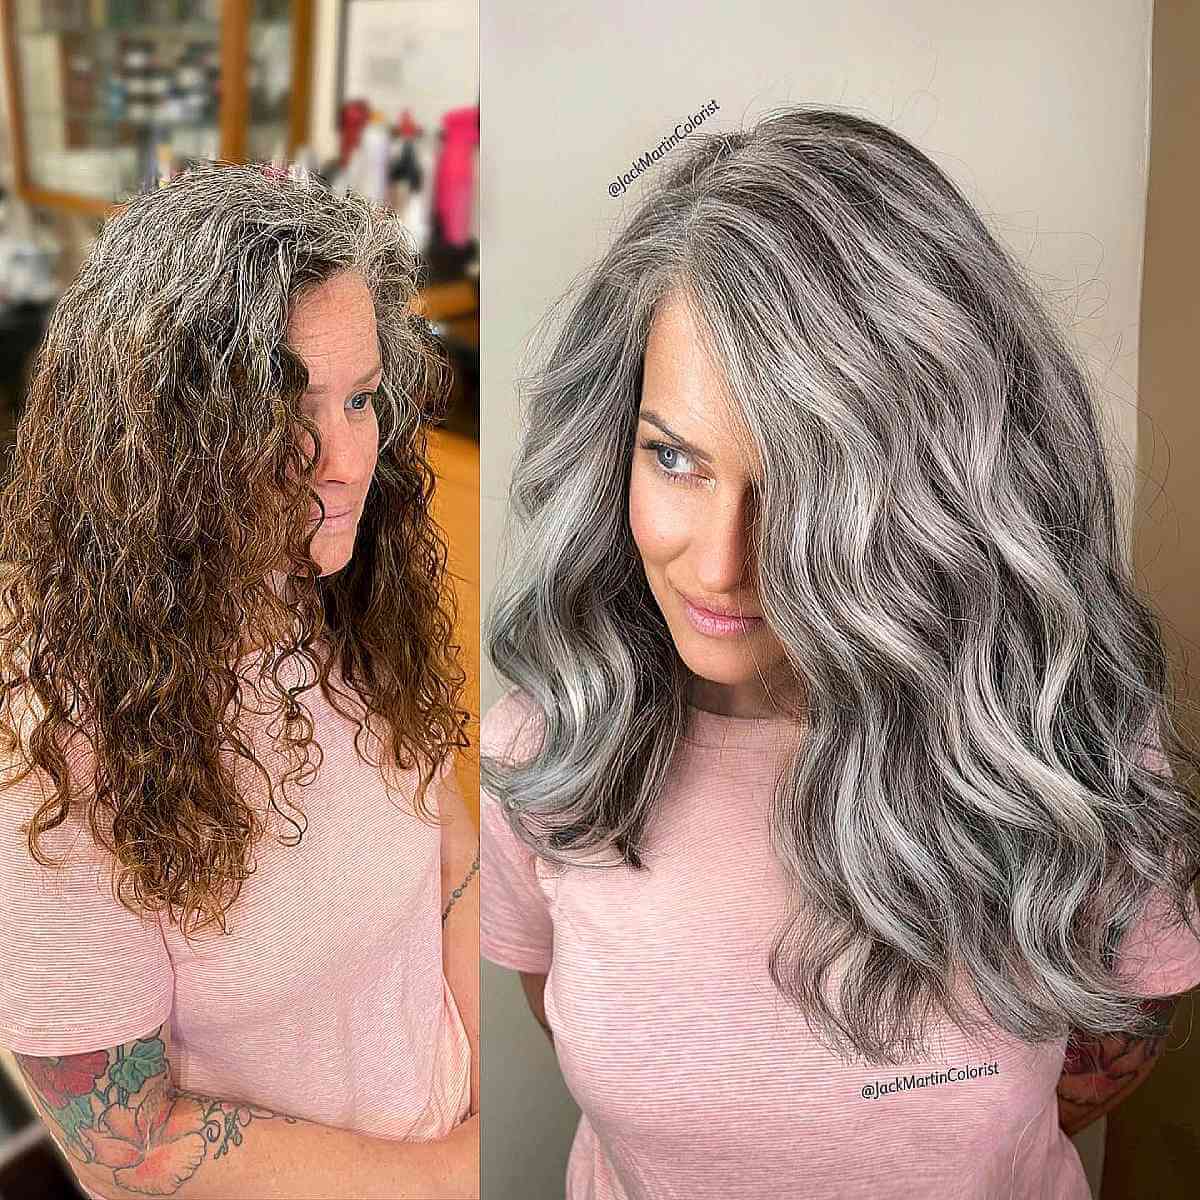 Naturally Silver and Blonde Streaks